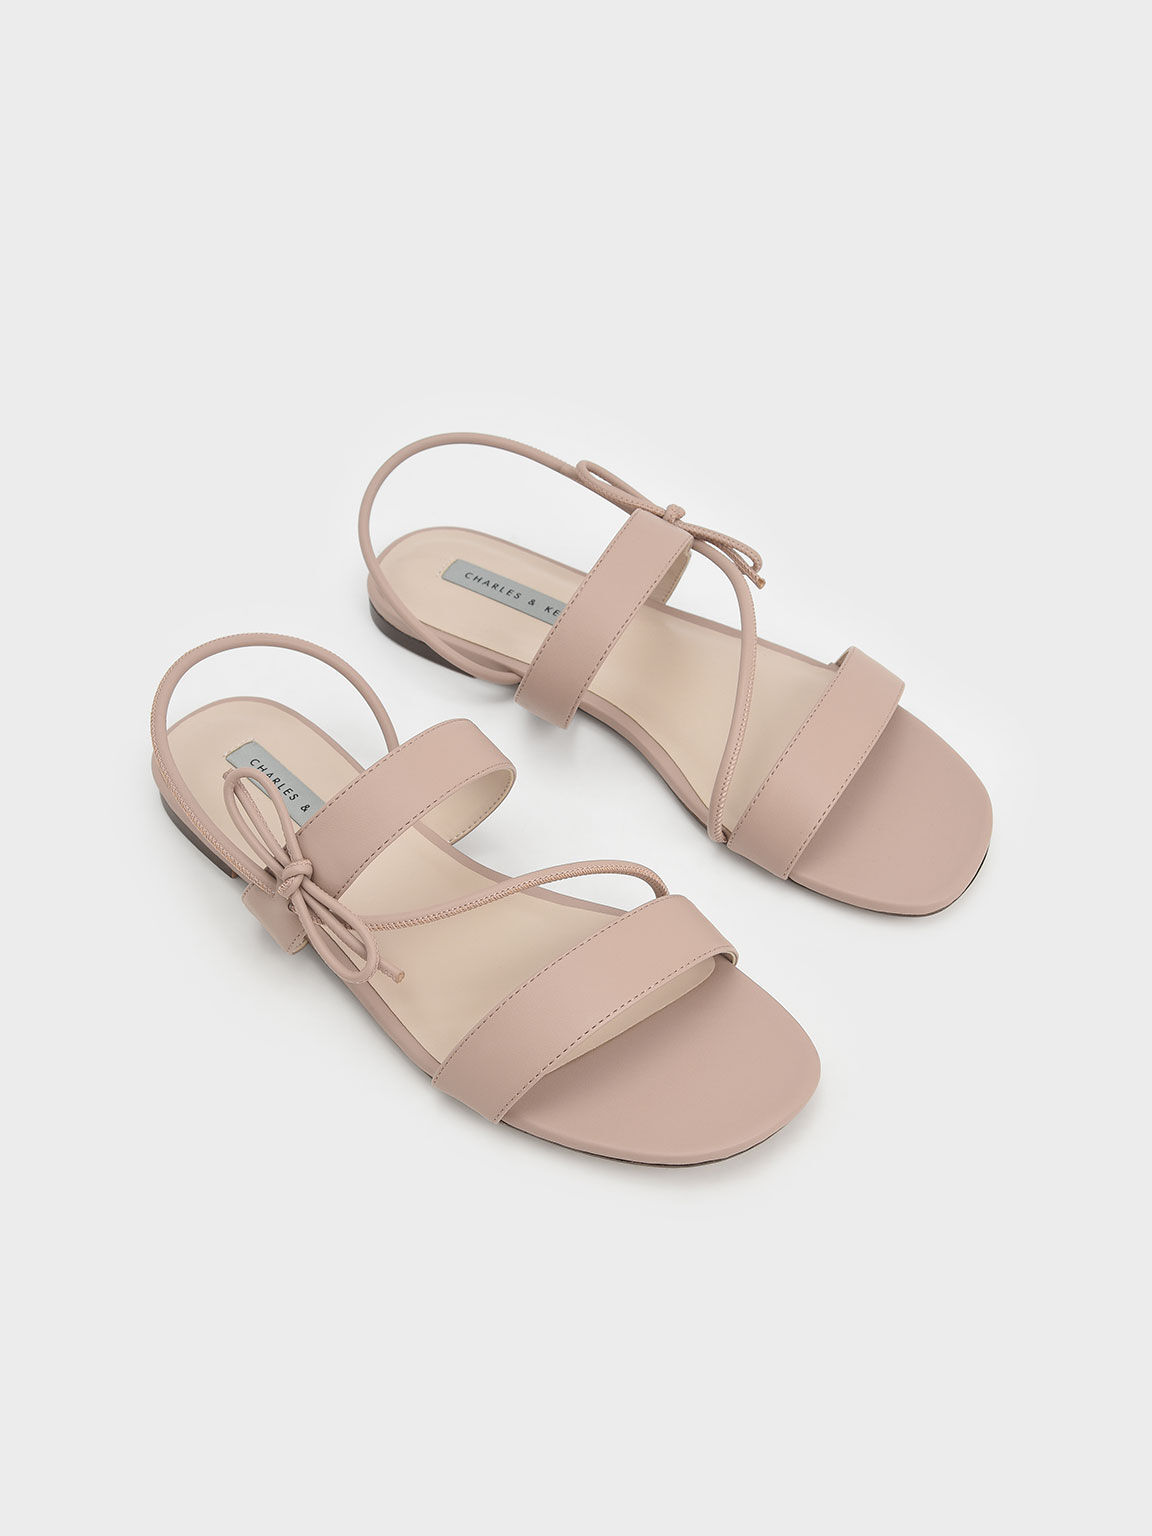 Textured Bow-Tie Flat Slingback Sandals, Nude, hi-res